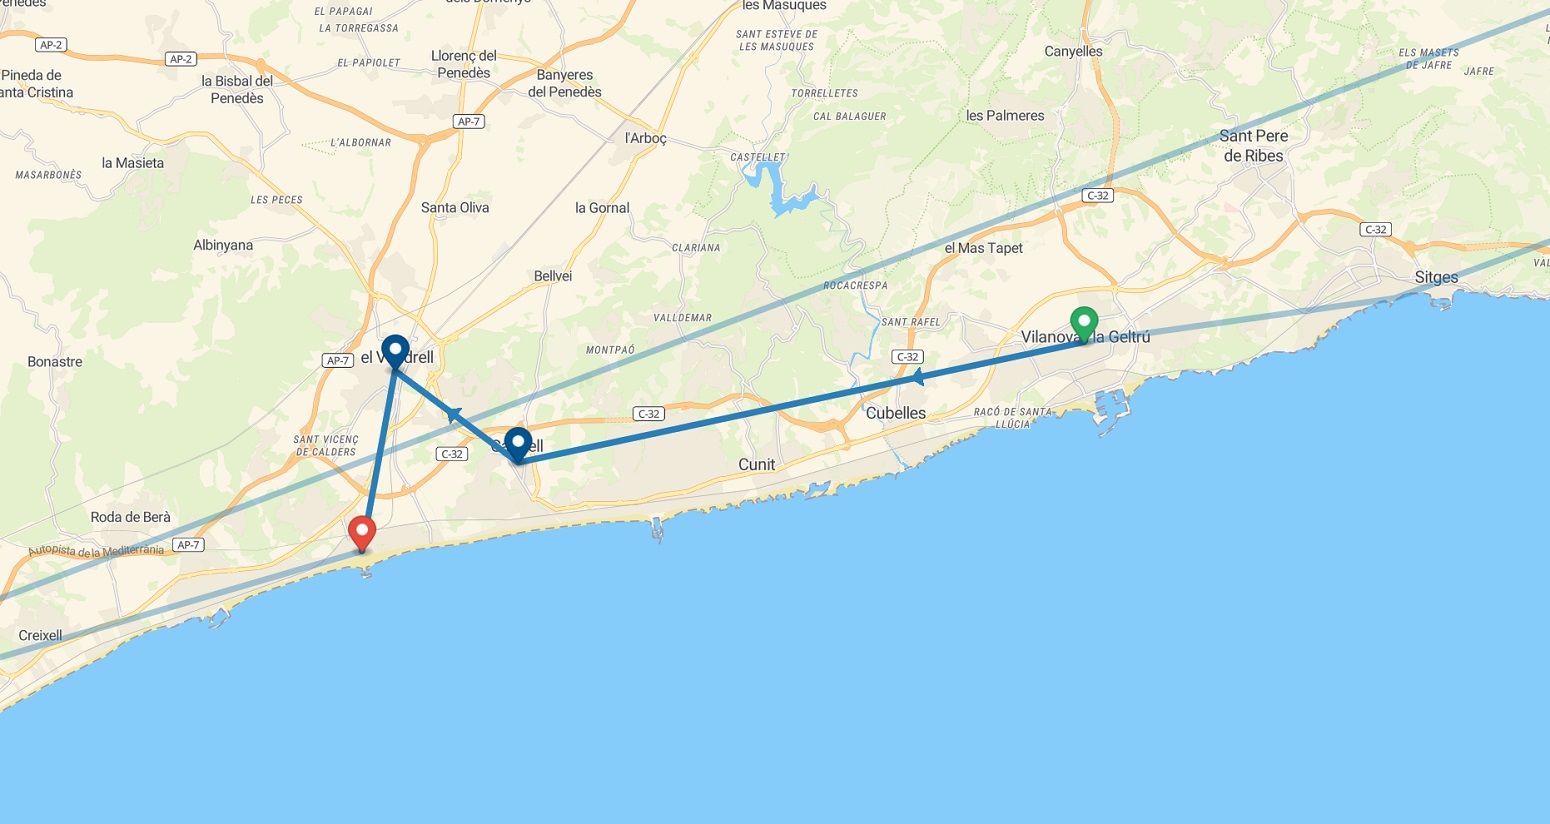 Route from Barcelona to Costa Daurada - Day 3